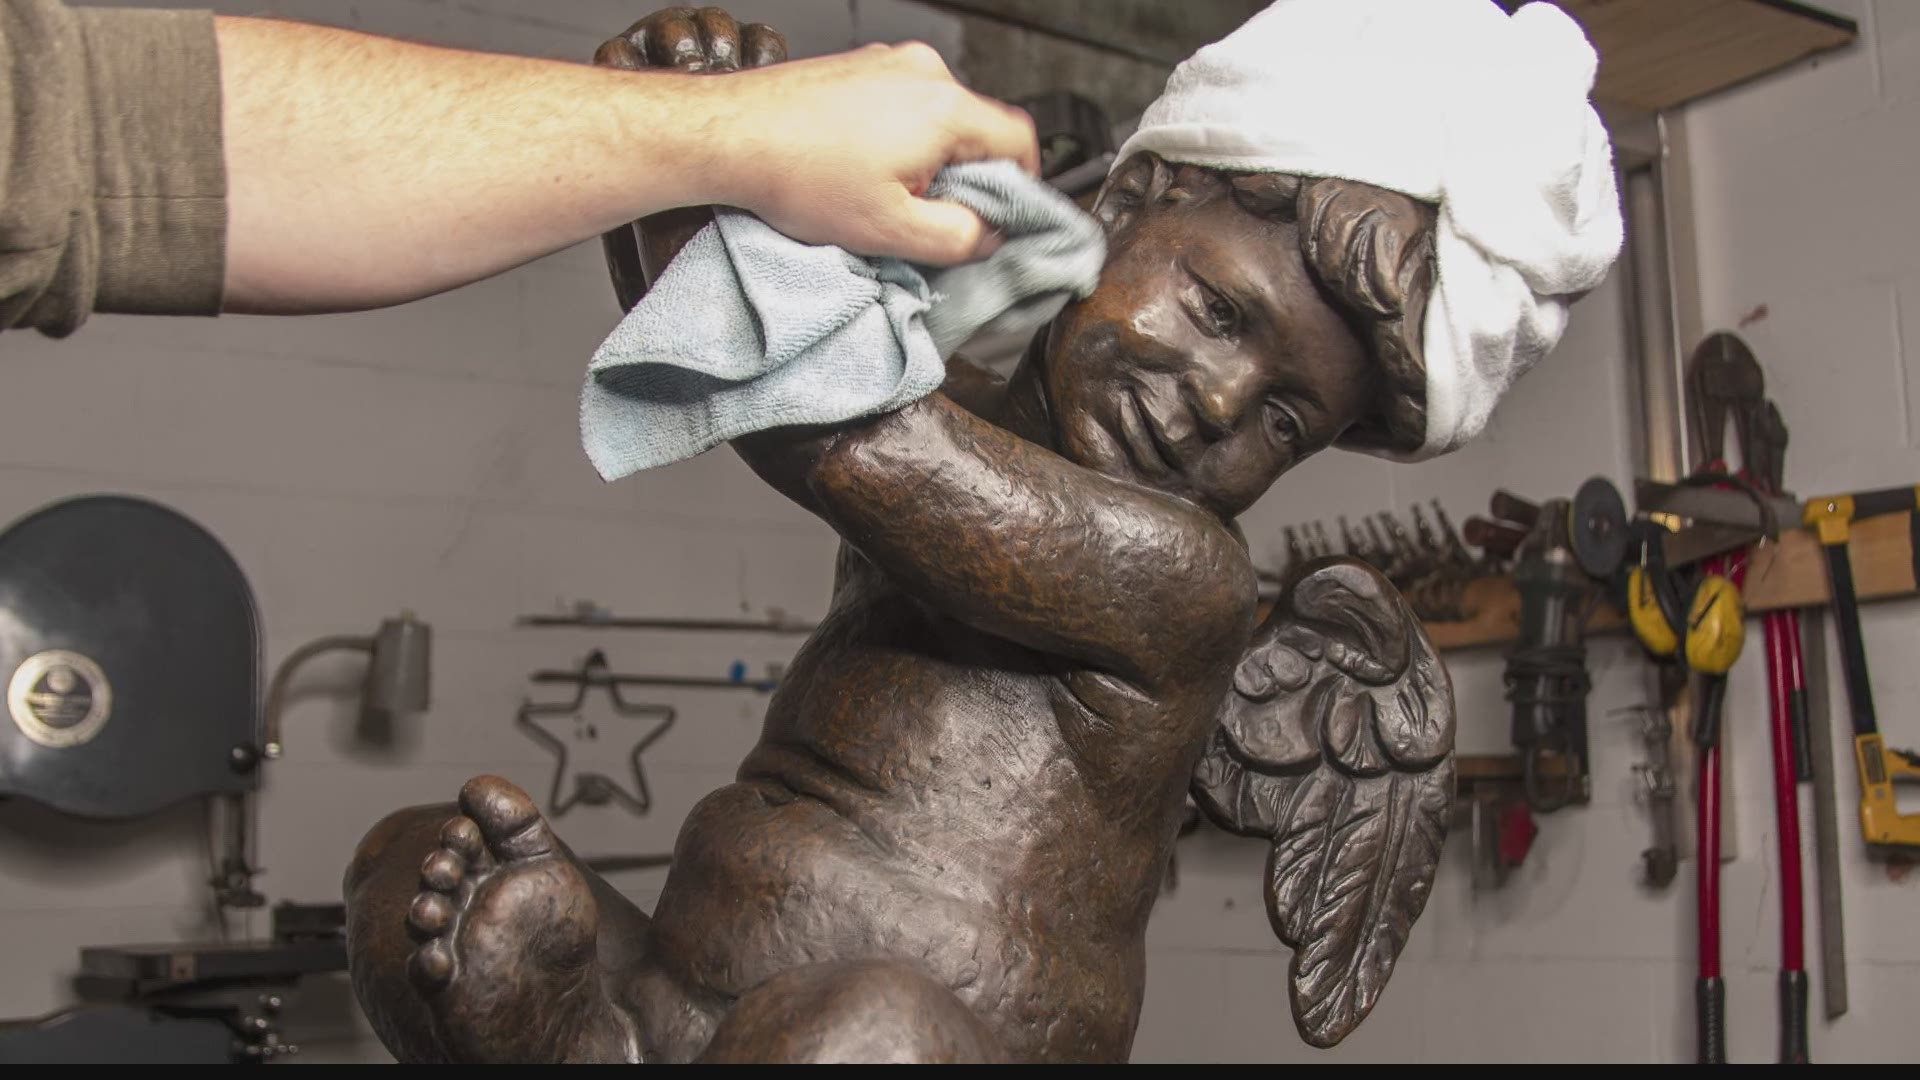 Good news: Despite the pandemic, the bronze cherub will still mysteriously appear on the Ayres Clock downtown Wednesday night before Thanksgiving.